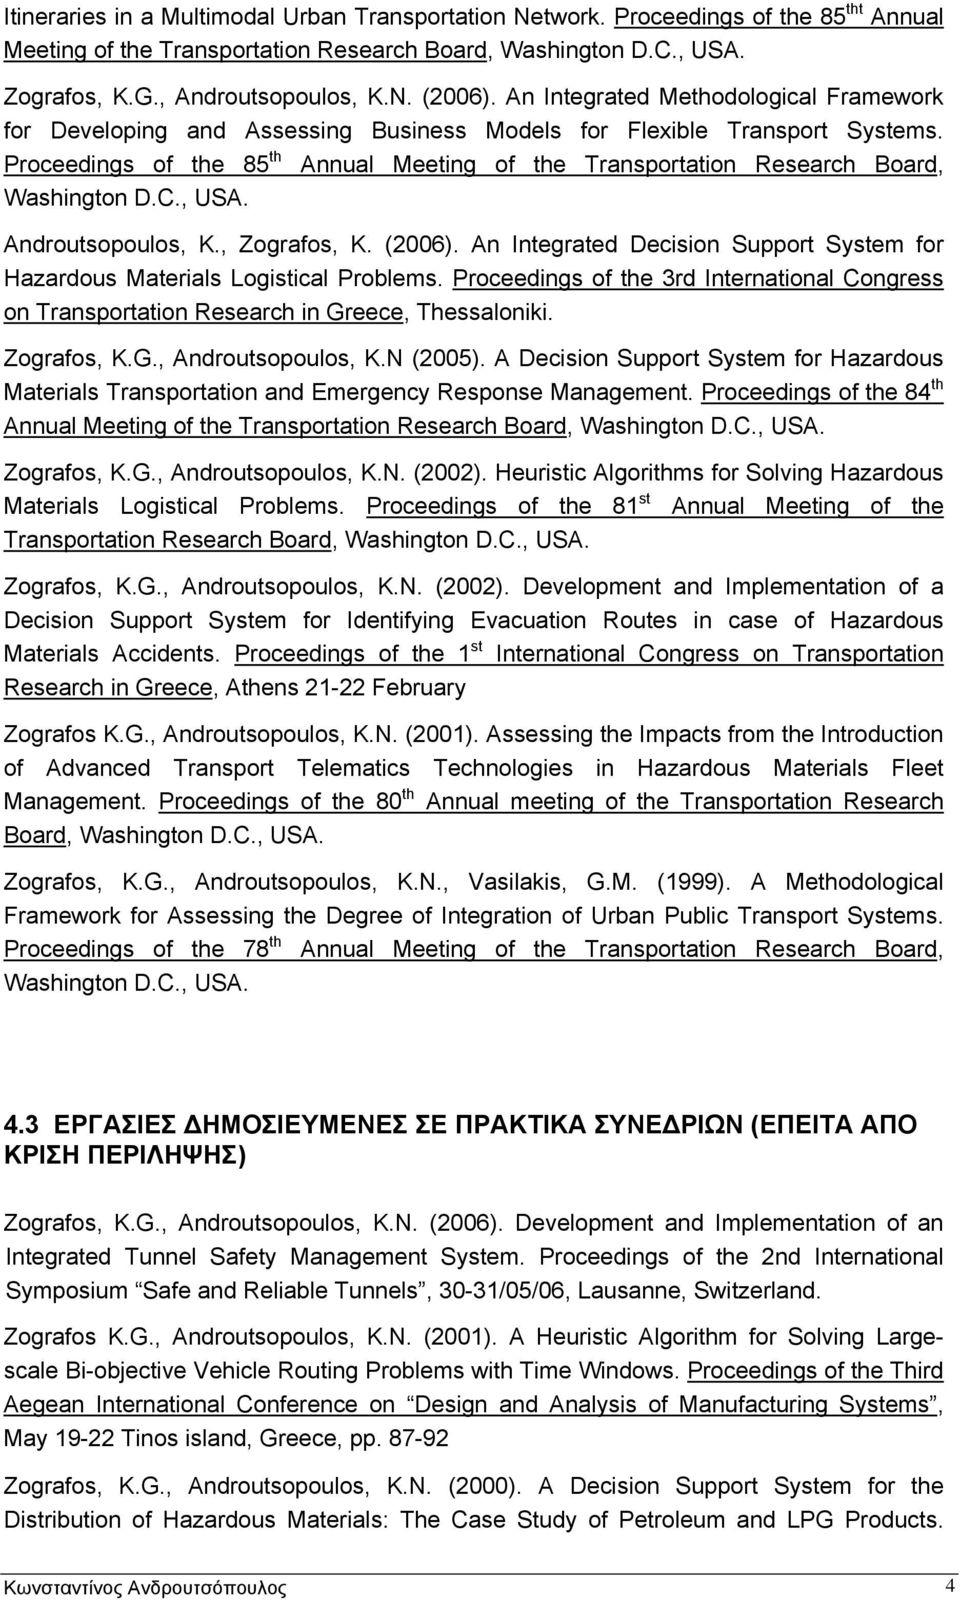 Proceedings of the 85 th Annual Meeting of the Transportation Research Board, Washington D.C., USA. Androutsopoulos, K., Zografos, K. (2006).